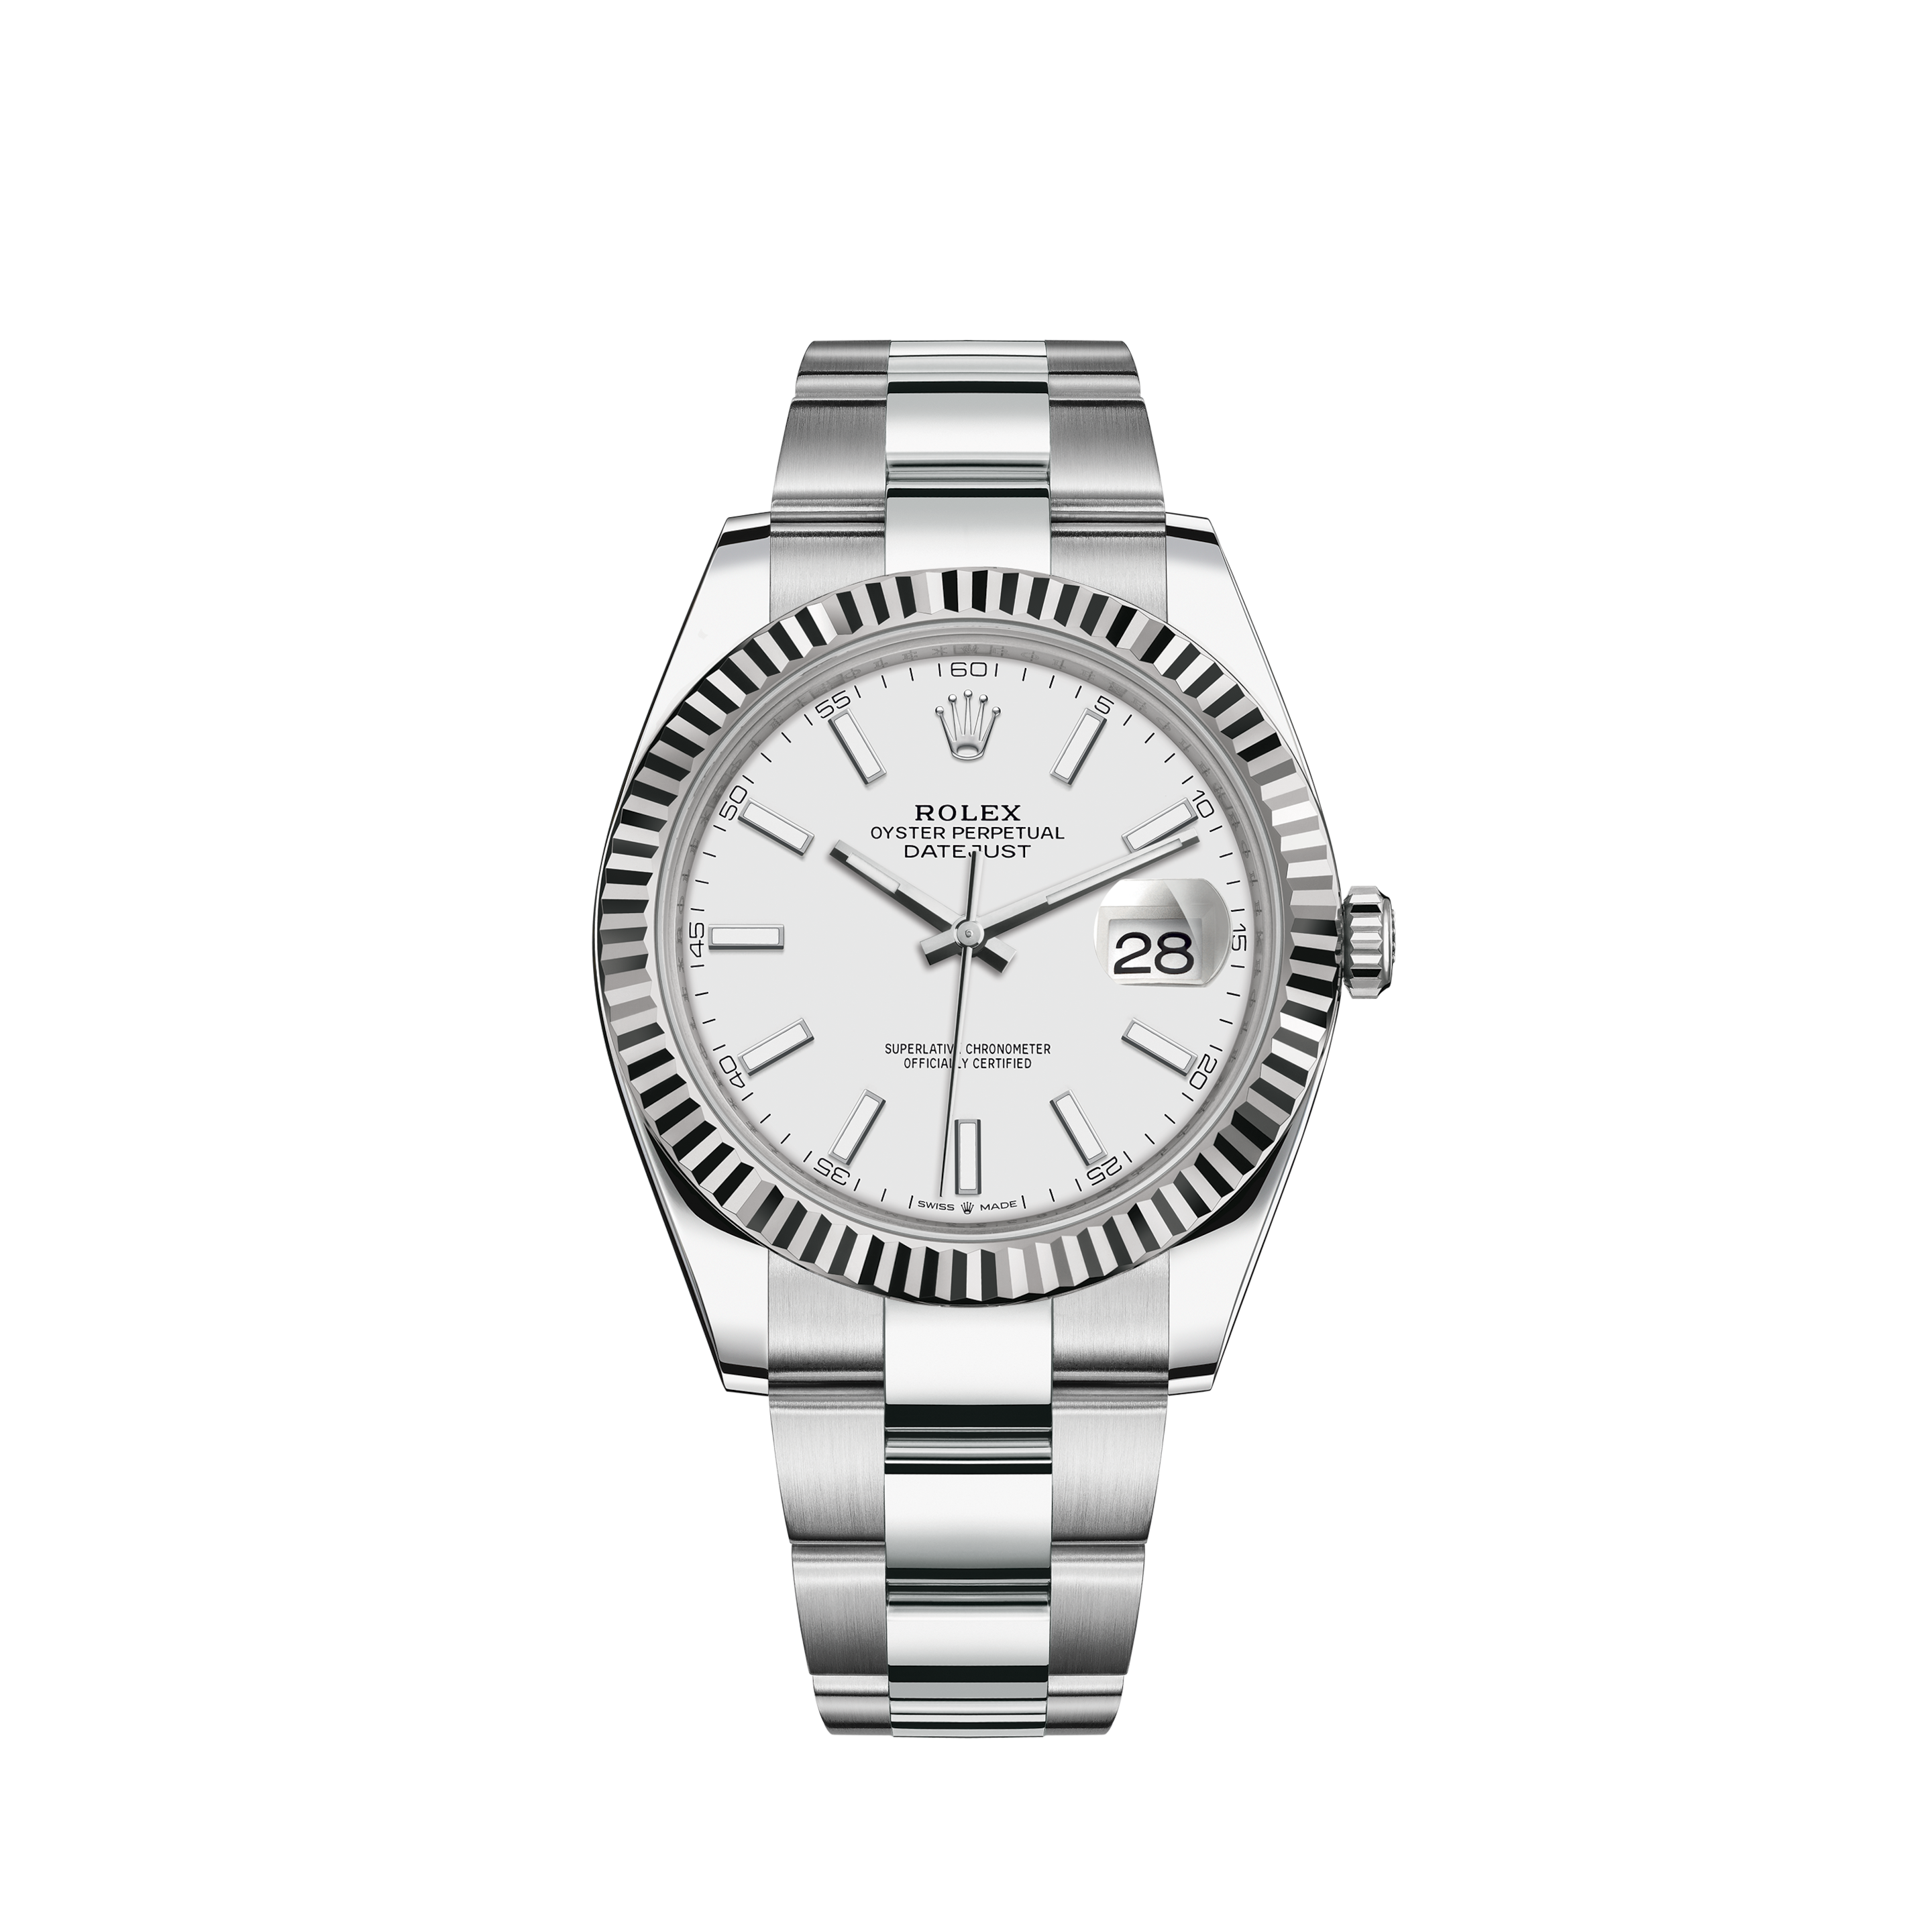 Rolex Datejust 36 Stainless Steel Domed / Oyster / Black Dial - With Box And PapersRolex Datejust 36 Stainless Steel Fluted / Jubilee / MOP - 116234 G